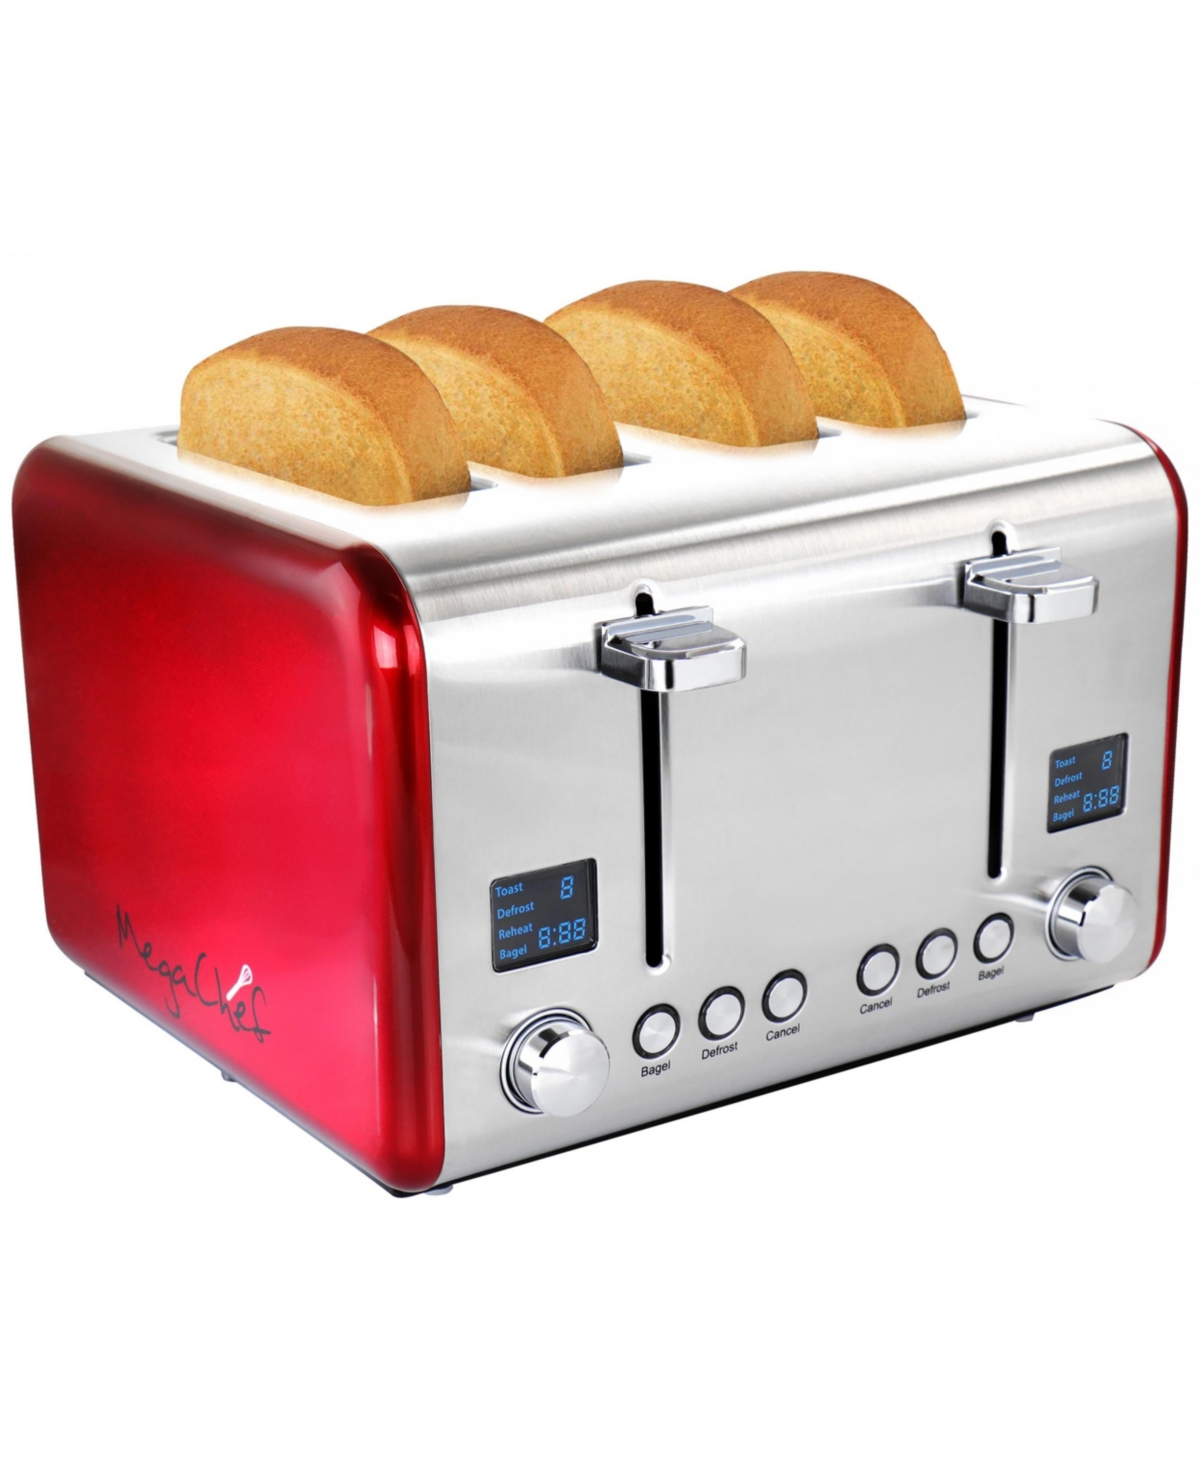 Megachef 4 Slice Toaster In Stainless Steel In Red